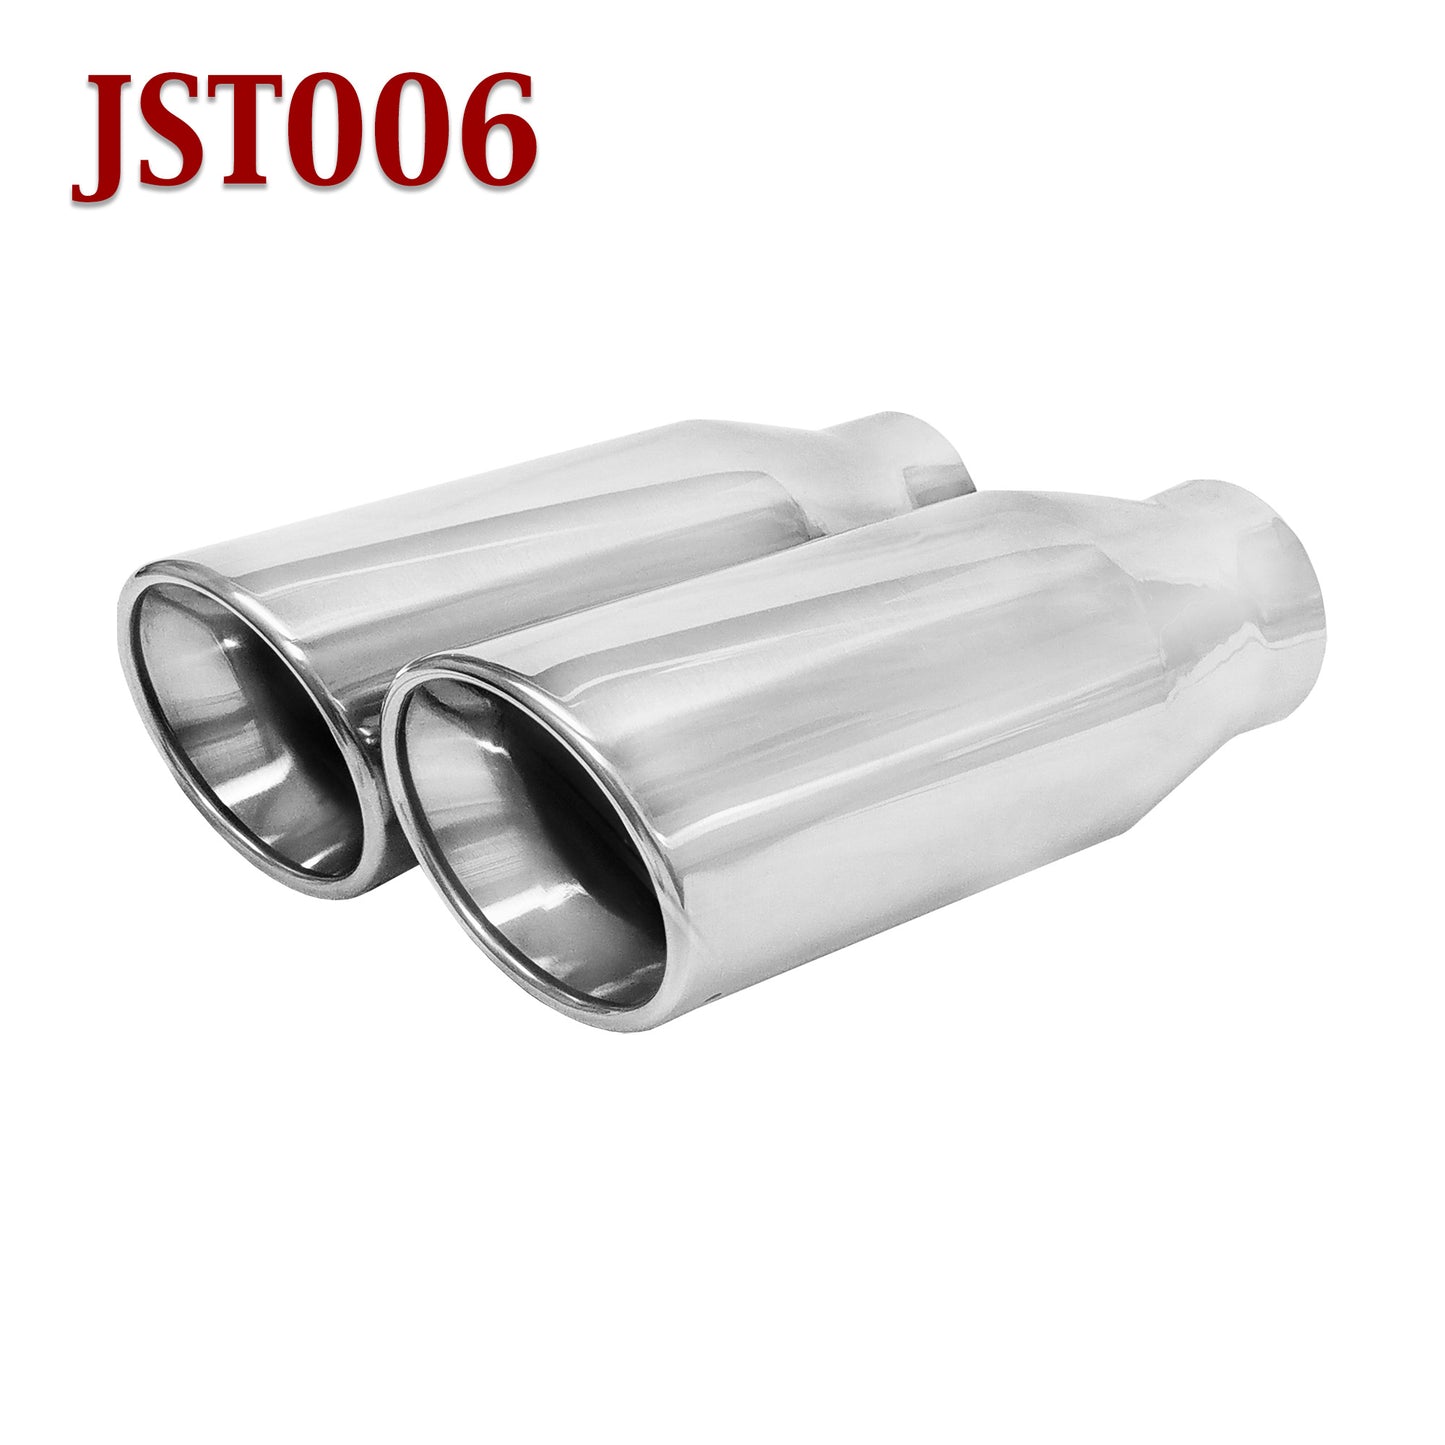 JST006 2.25" Stainless Round Exhaust Tip 2 1/4" Inlet 3 1/2" Outlet 8 1/2" Long